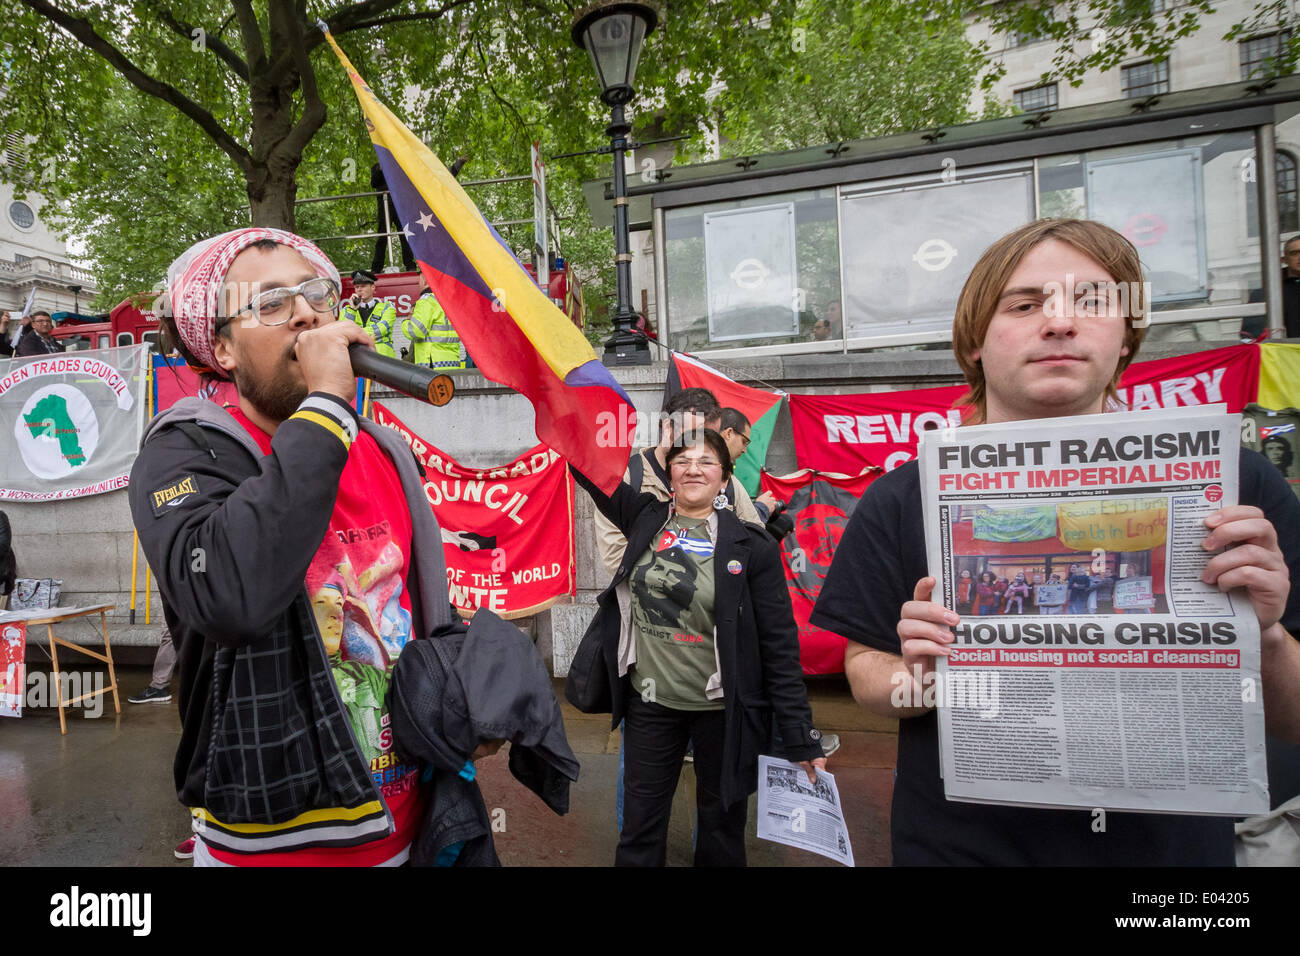 May Day 2014 protest March in London Stock Photo